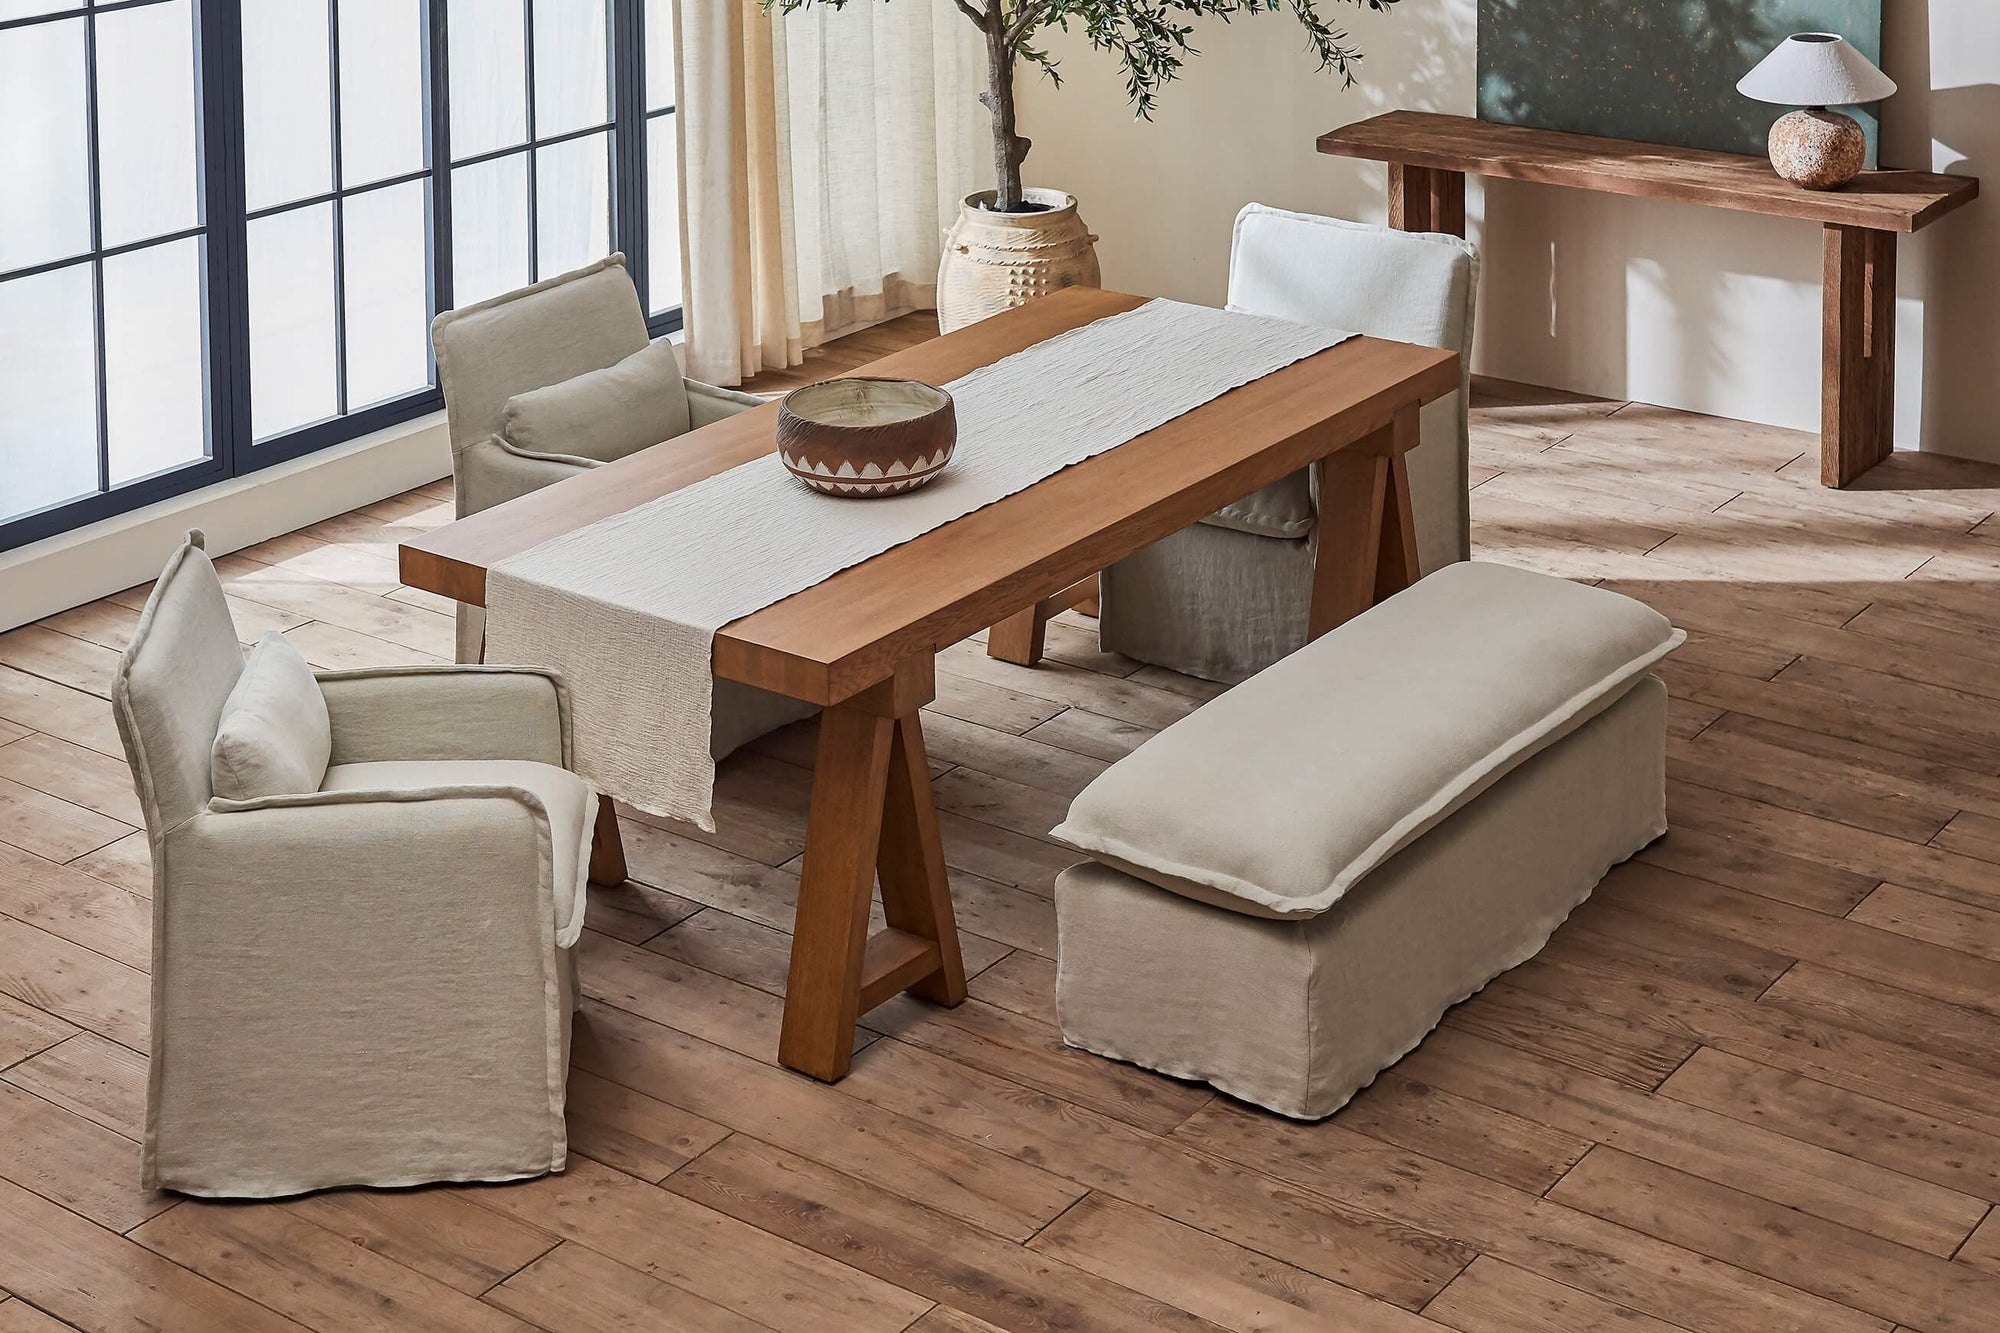 Neva Dining Bench in Warm Oatmeal, a light warm beige Medium Weight Linen, placed in a sunlit room surrounding the Rylance Dining Table and three Melo Dining Chairs